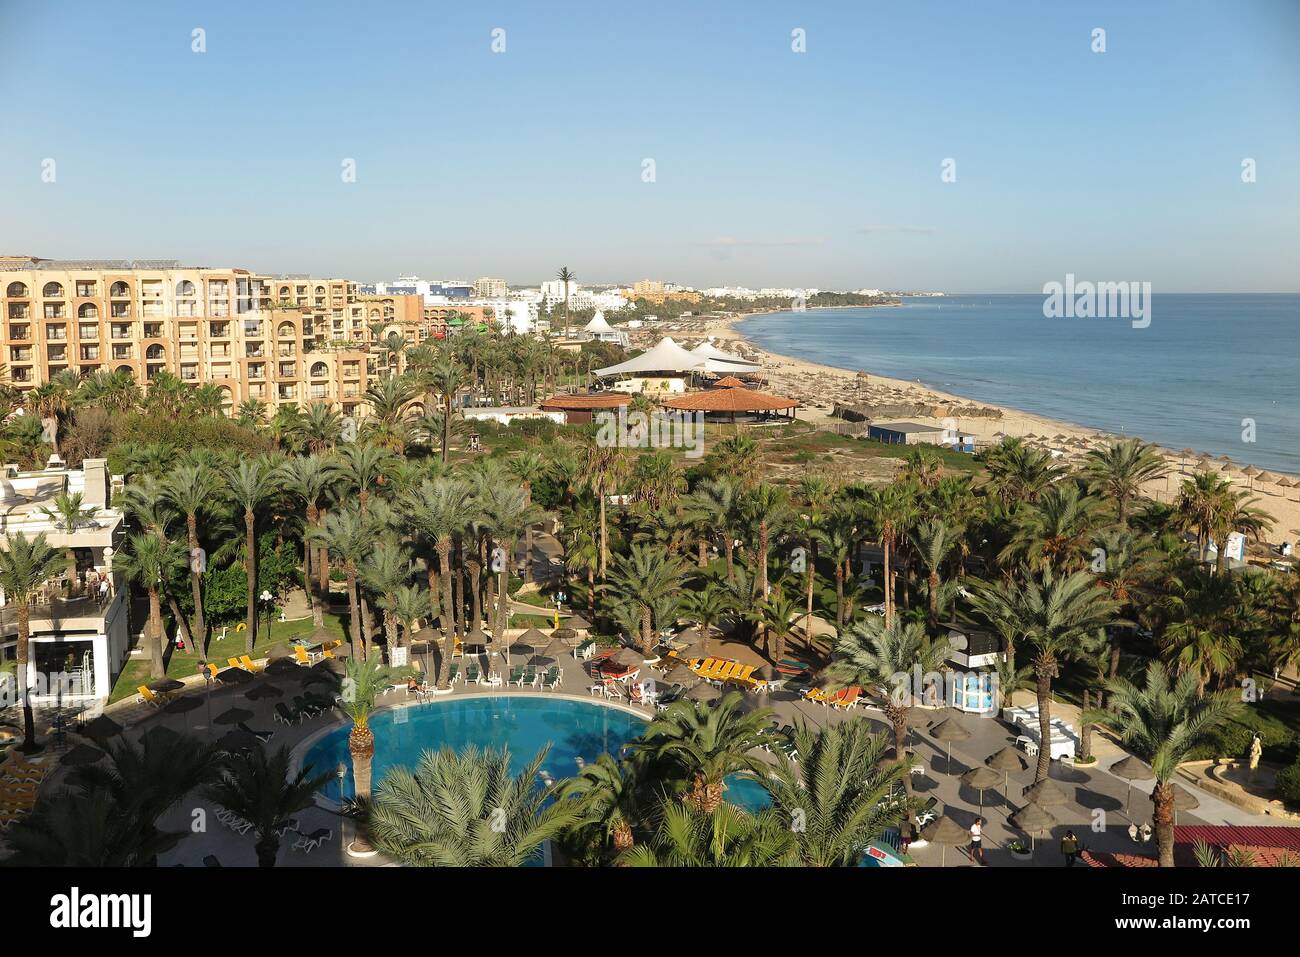 View from above along the sandy beach of Sousse Stock Photo